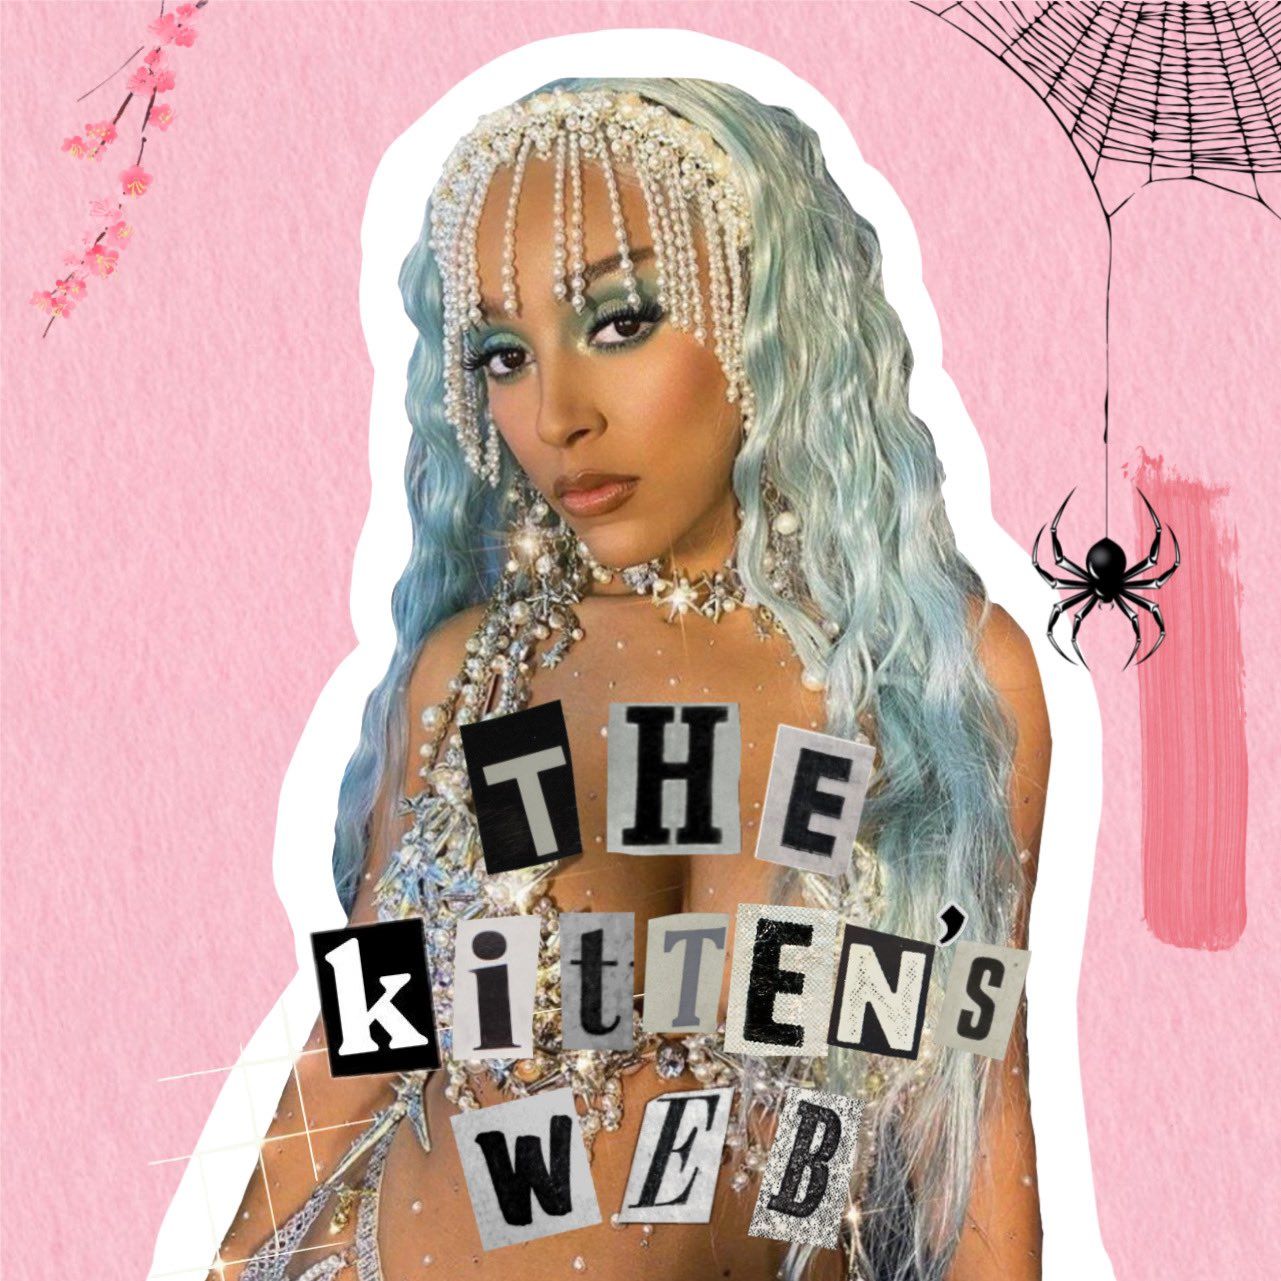 A collage of the cover of the book The Kitten's Web, with a picture of a woman with blue hair and a spider web behind her. - Doja Cat